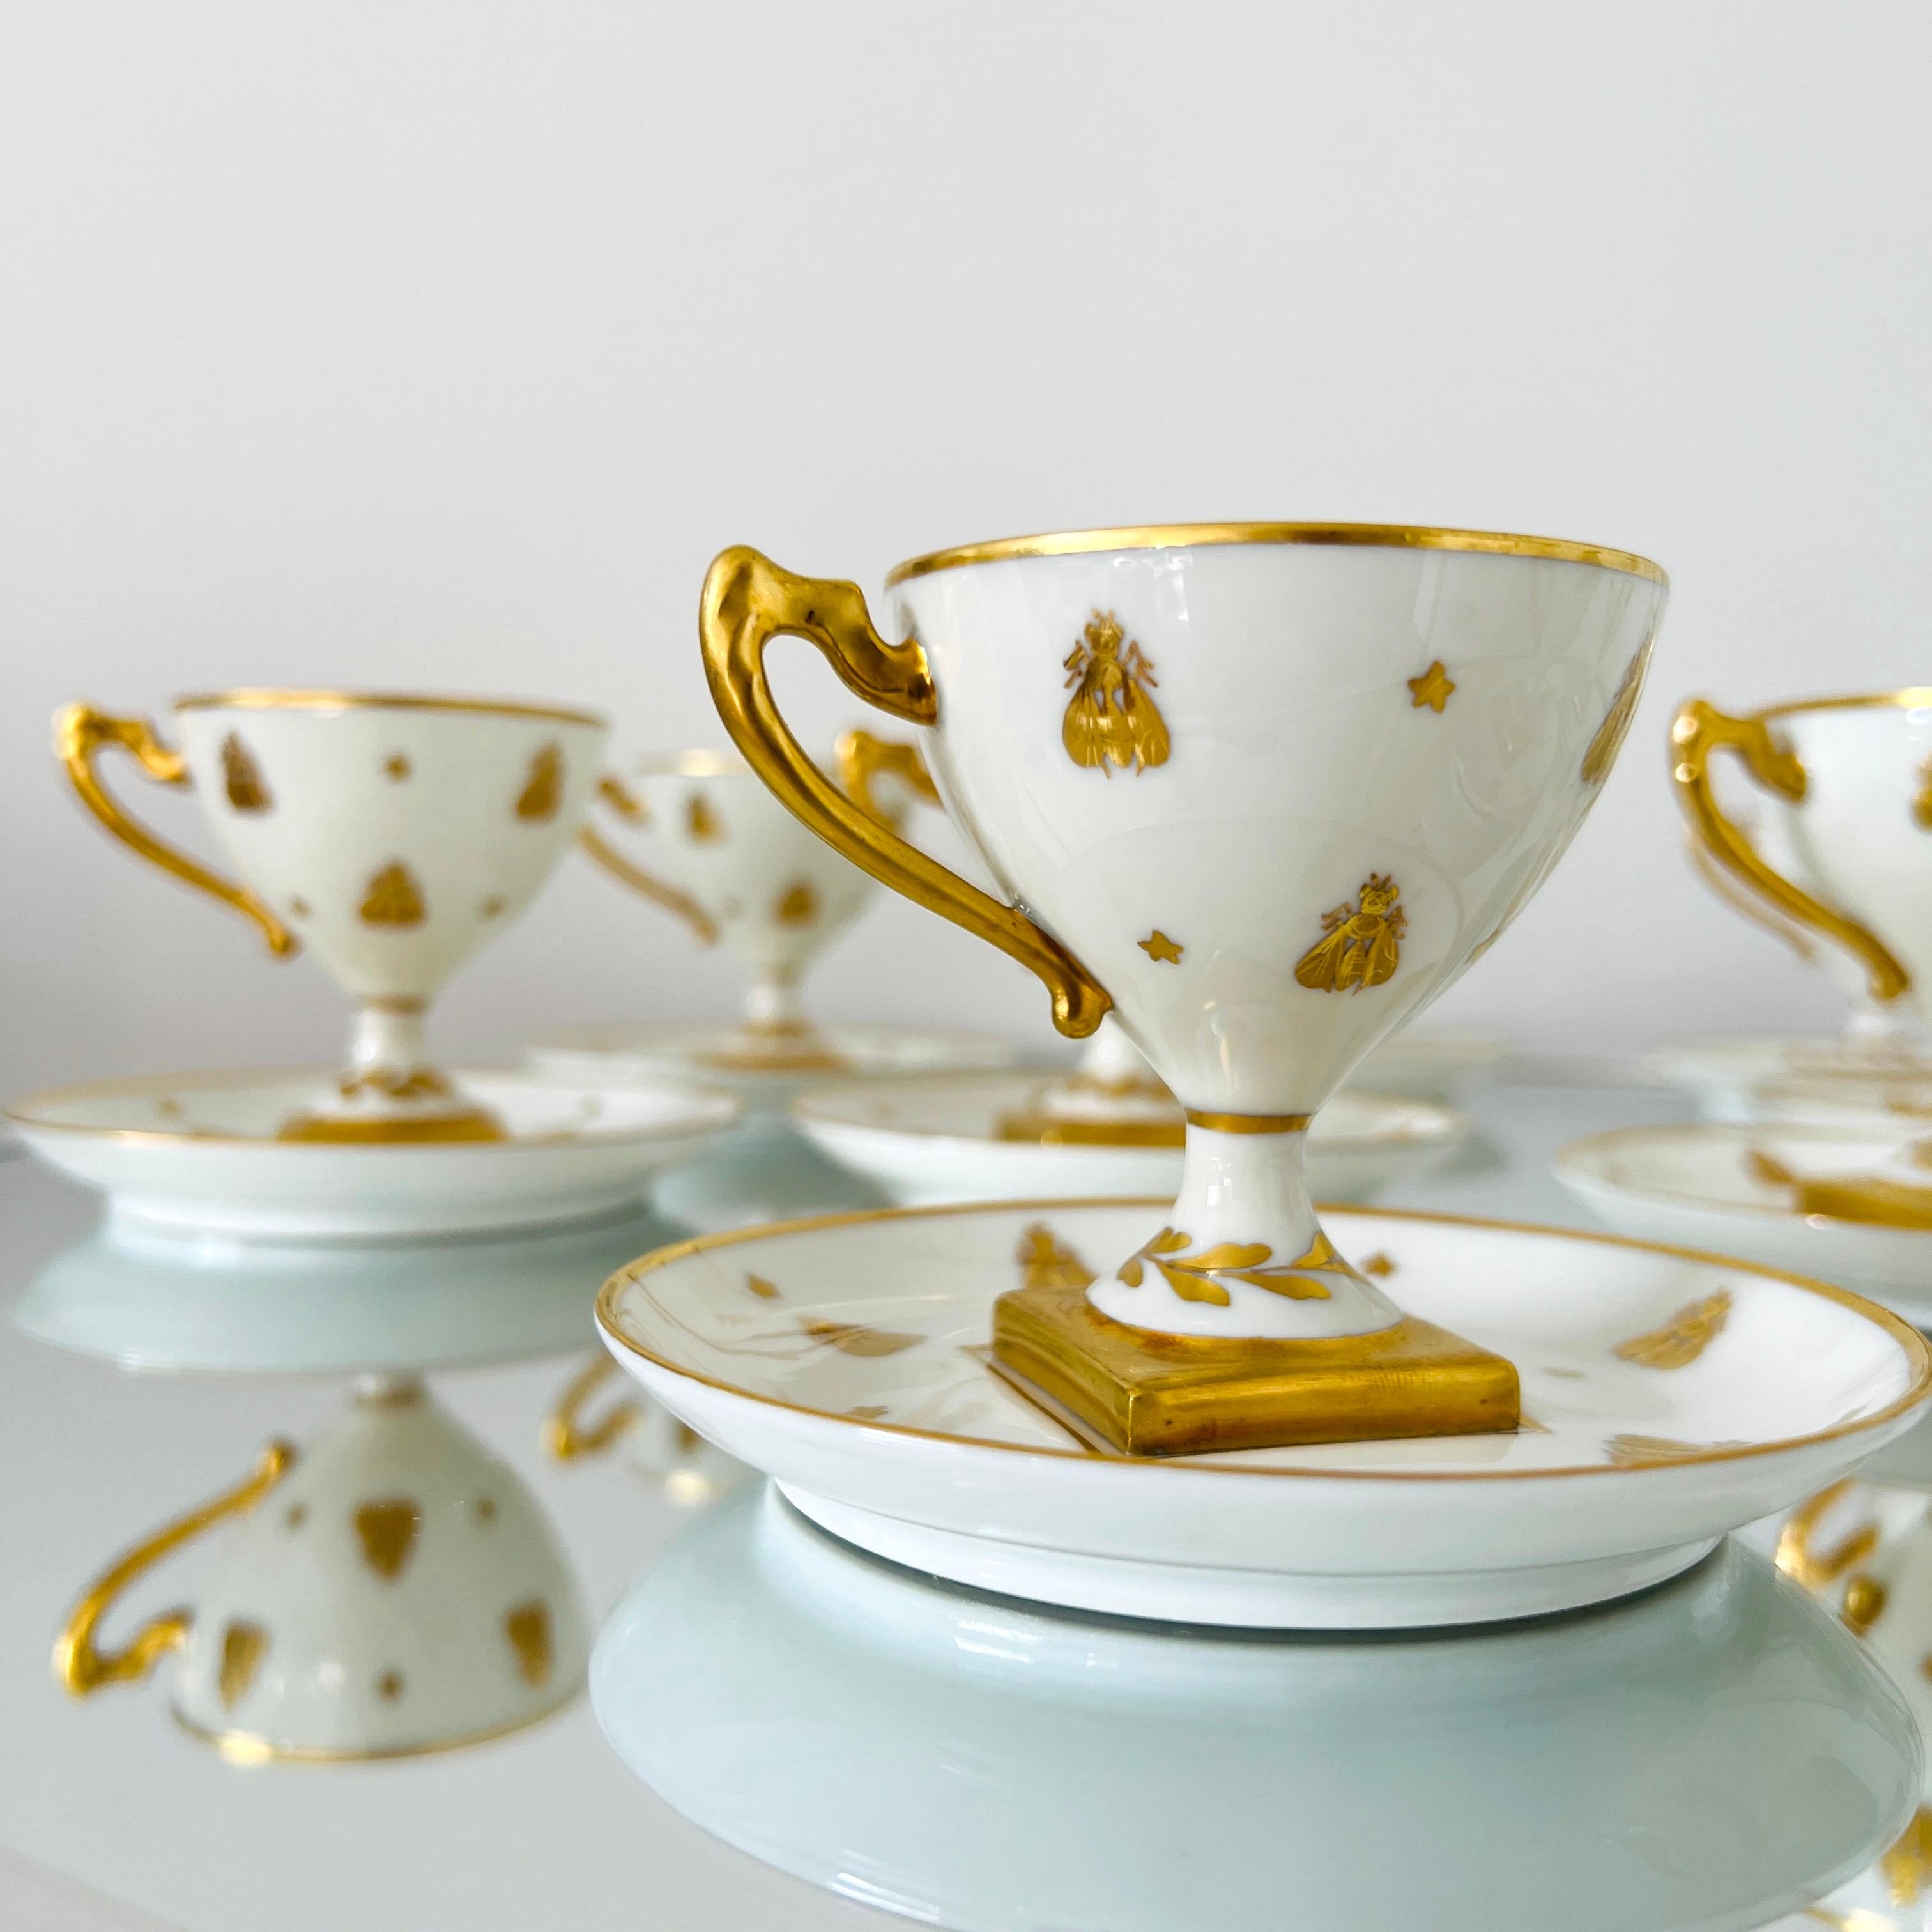 Le Tallec Golden Bees Porcelain Demitasse Cups and Saucers, circa 1957 Set/11-12 For Sale 1